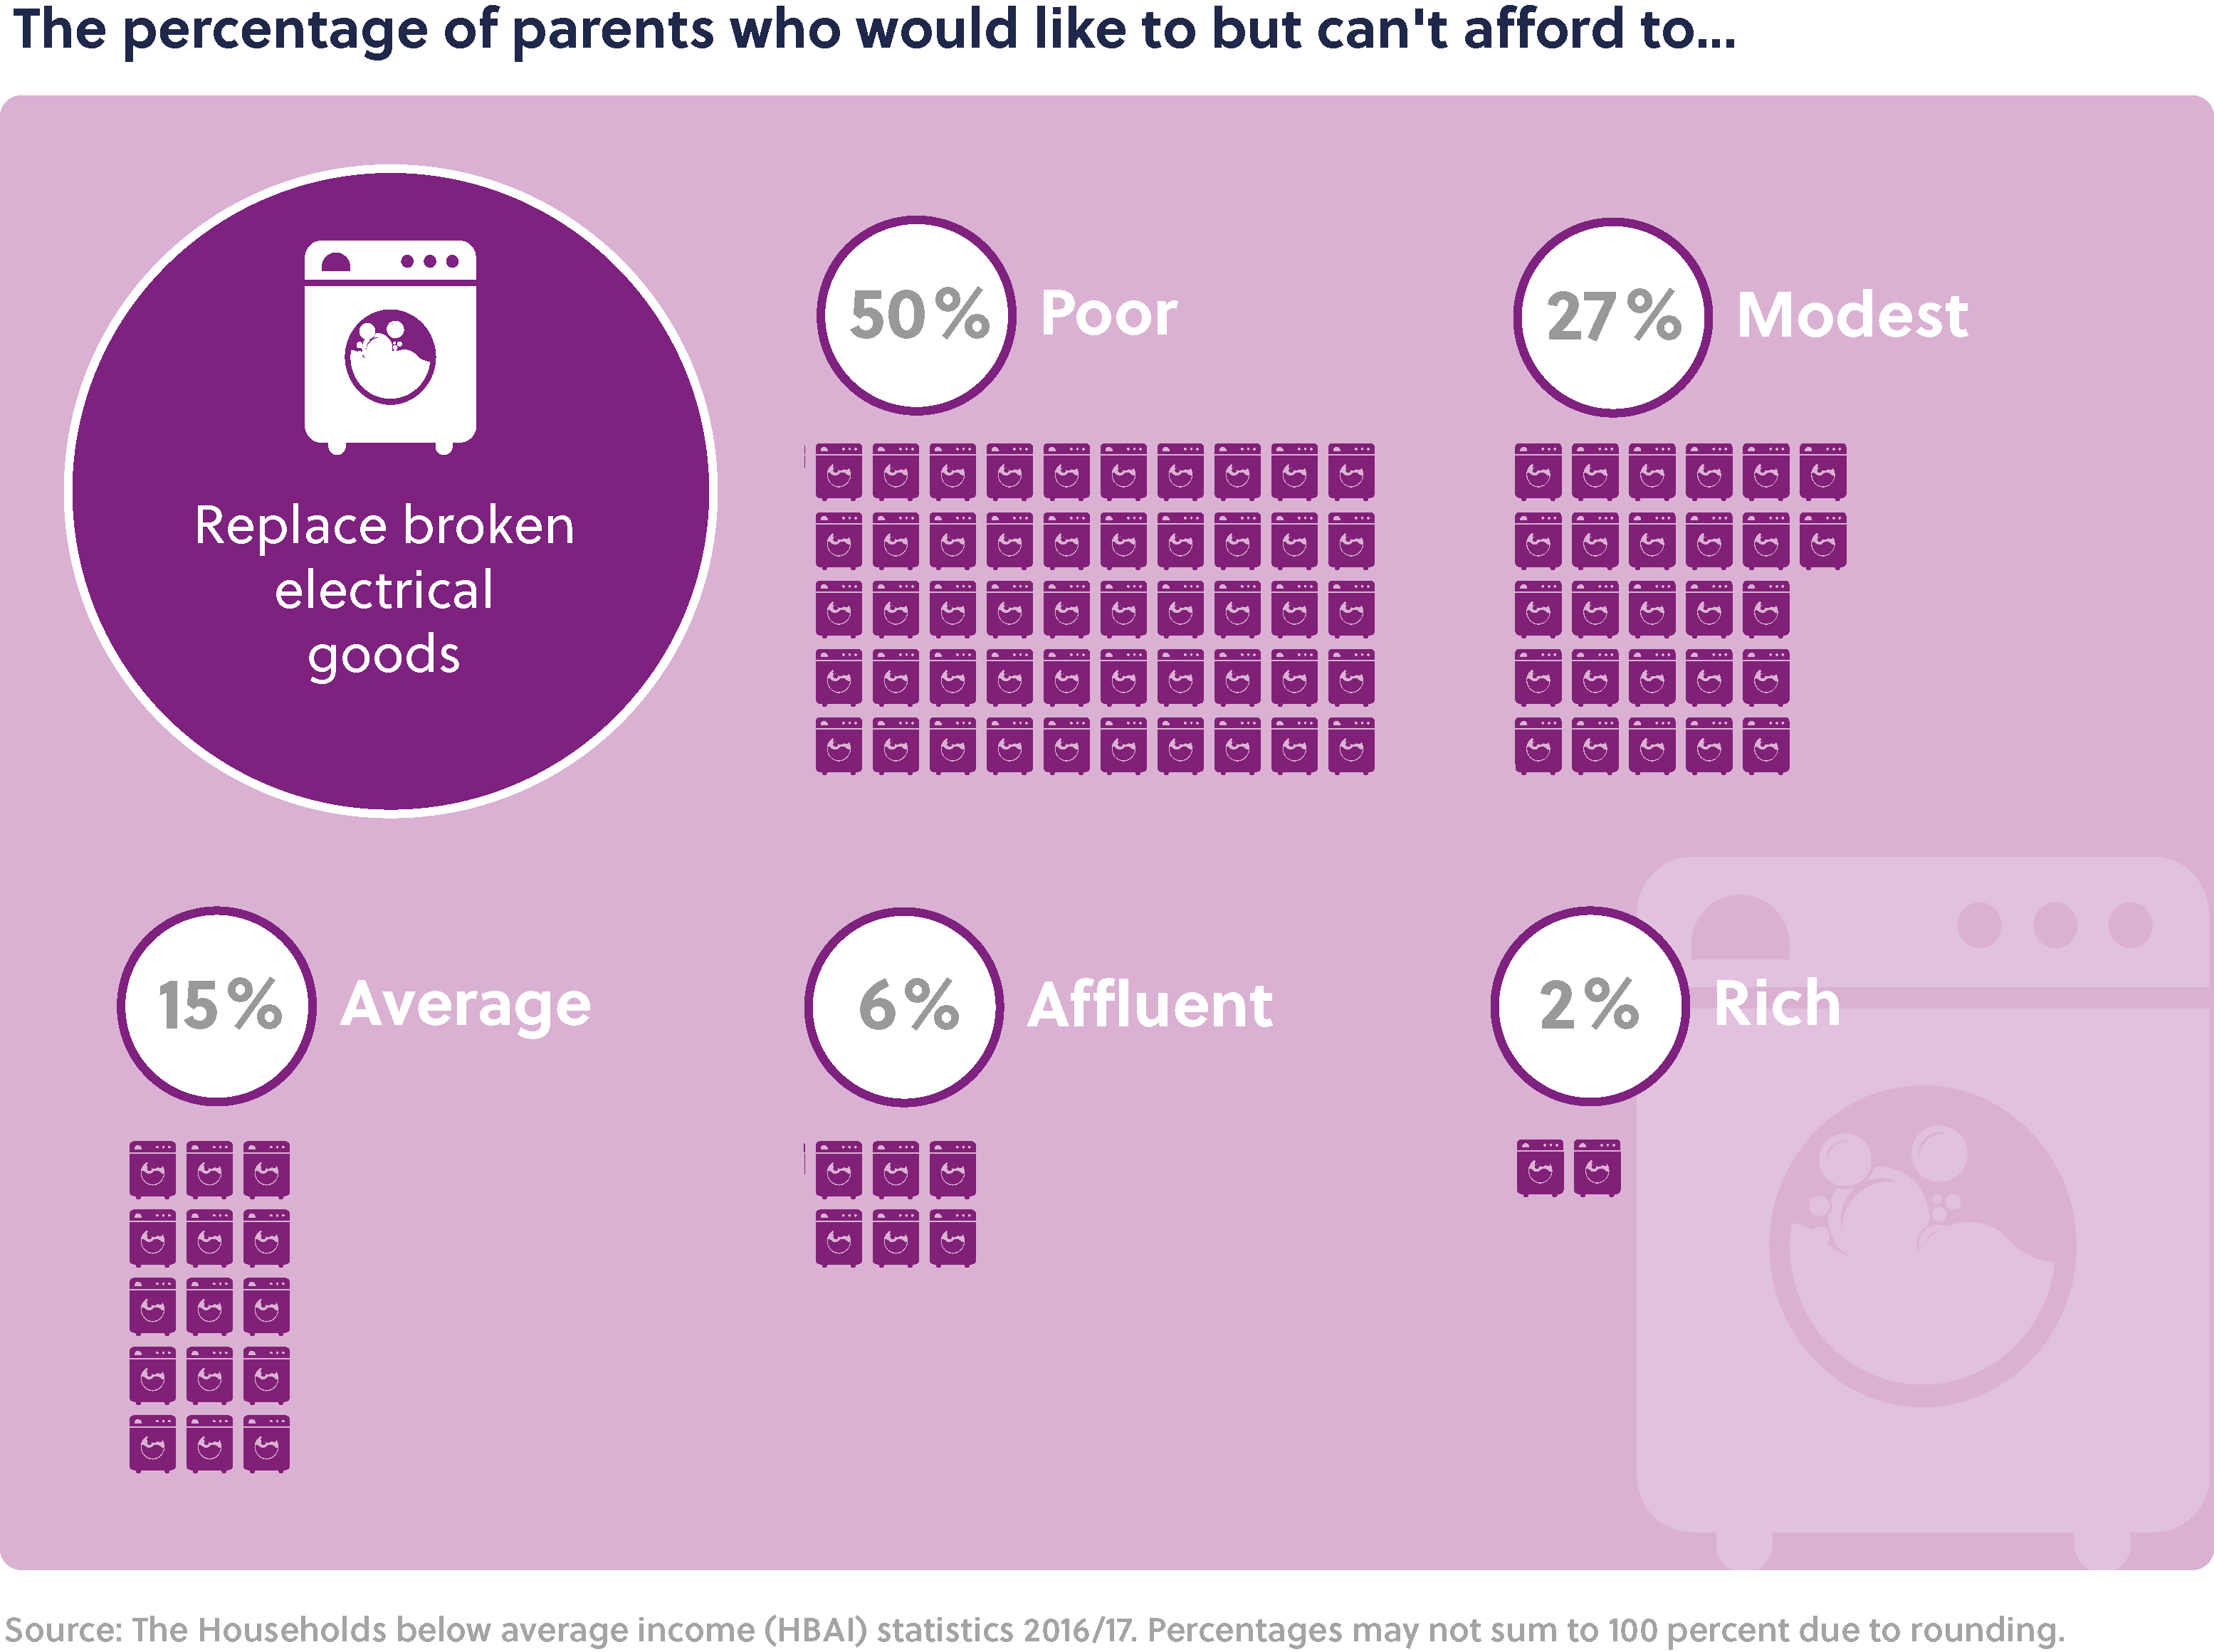 Main title: The percentage of parents who would like to but can't afford to... Sub-heading: Replace broken electrical goods. Poor: 50%, Modest: 27%, Average: 15%, Affluent: 6%, and Rich: 2%.  Source: The Households below average income (HBAI) statistics 2016/17. Percentages may not sum to 100 percent due to rounding.  